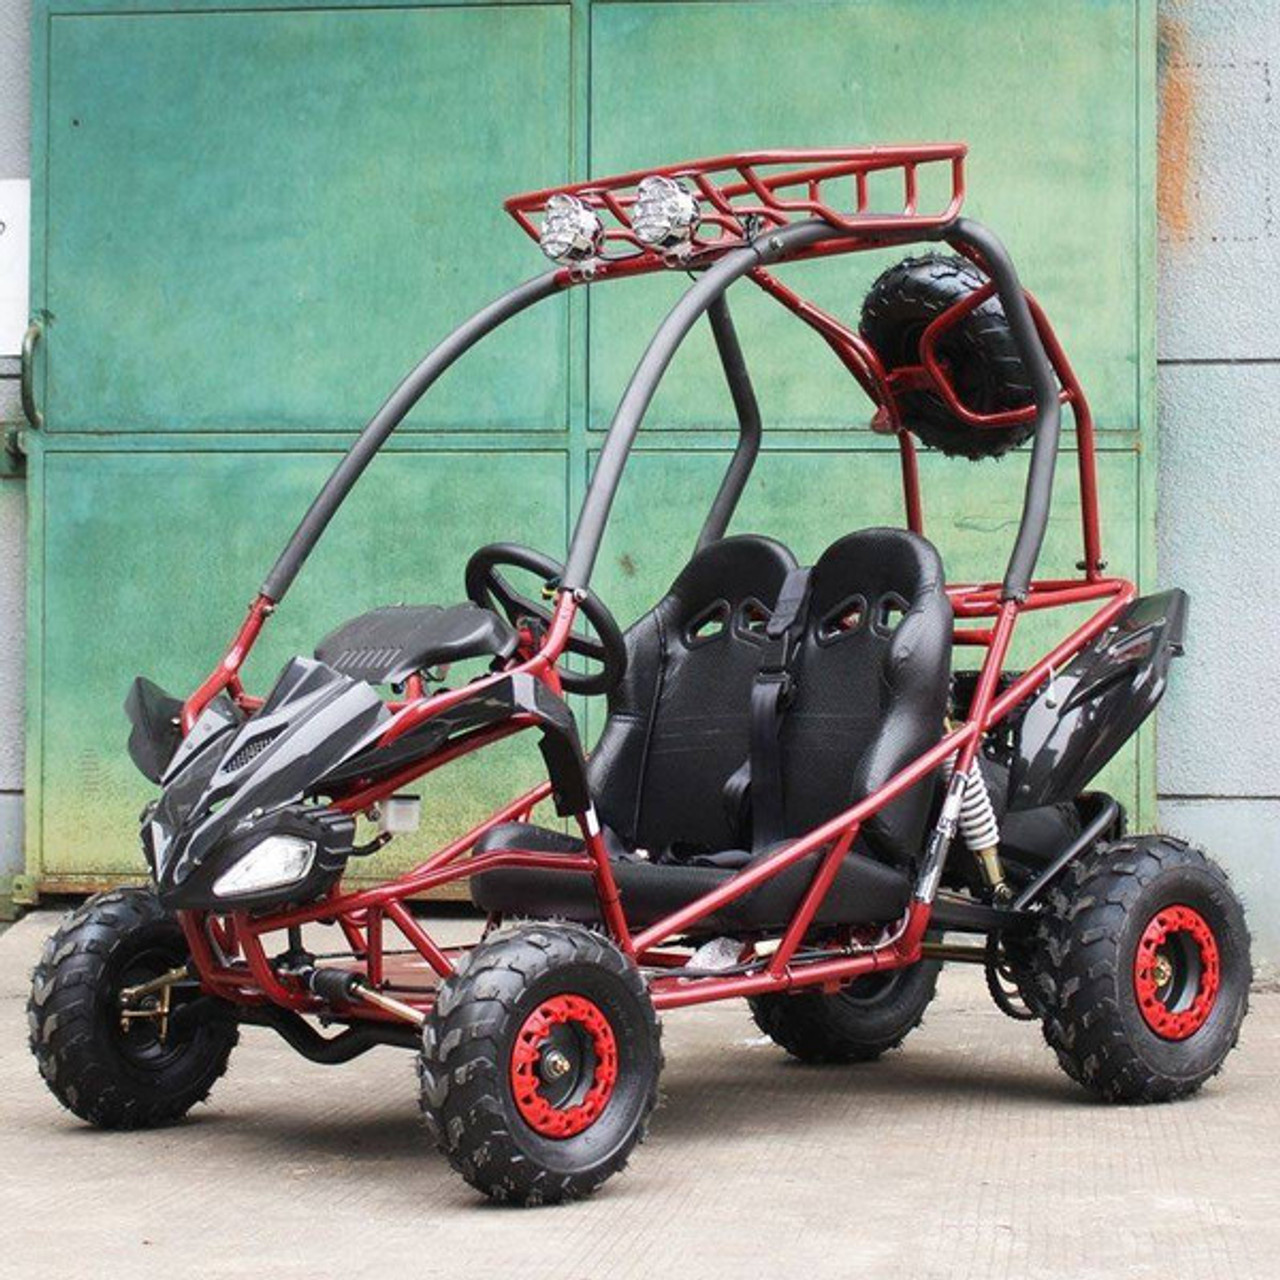 Dongfang 200cc (DF200GVS) Kids Go Kart, Type-GVS, Automatic, Spare Wheel, Remote Control